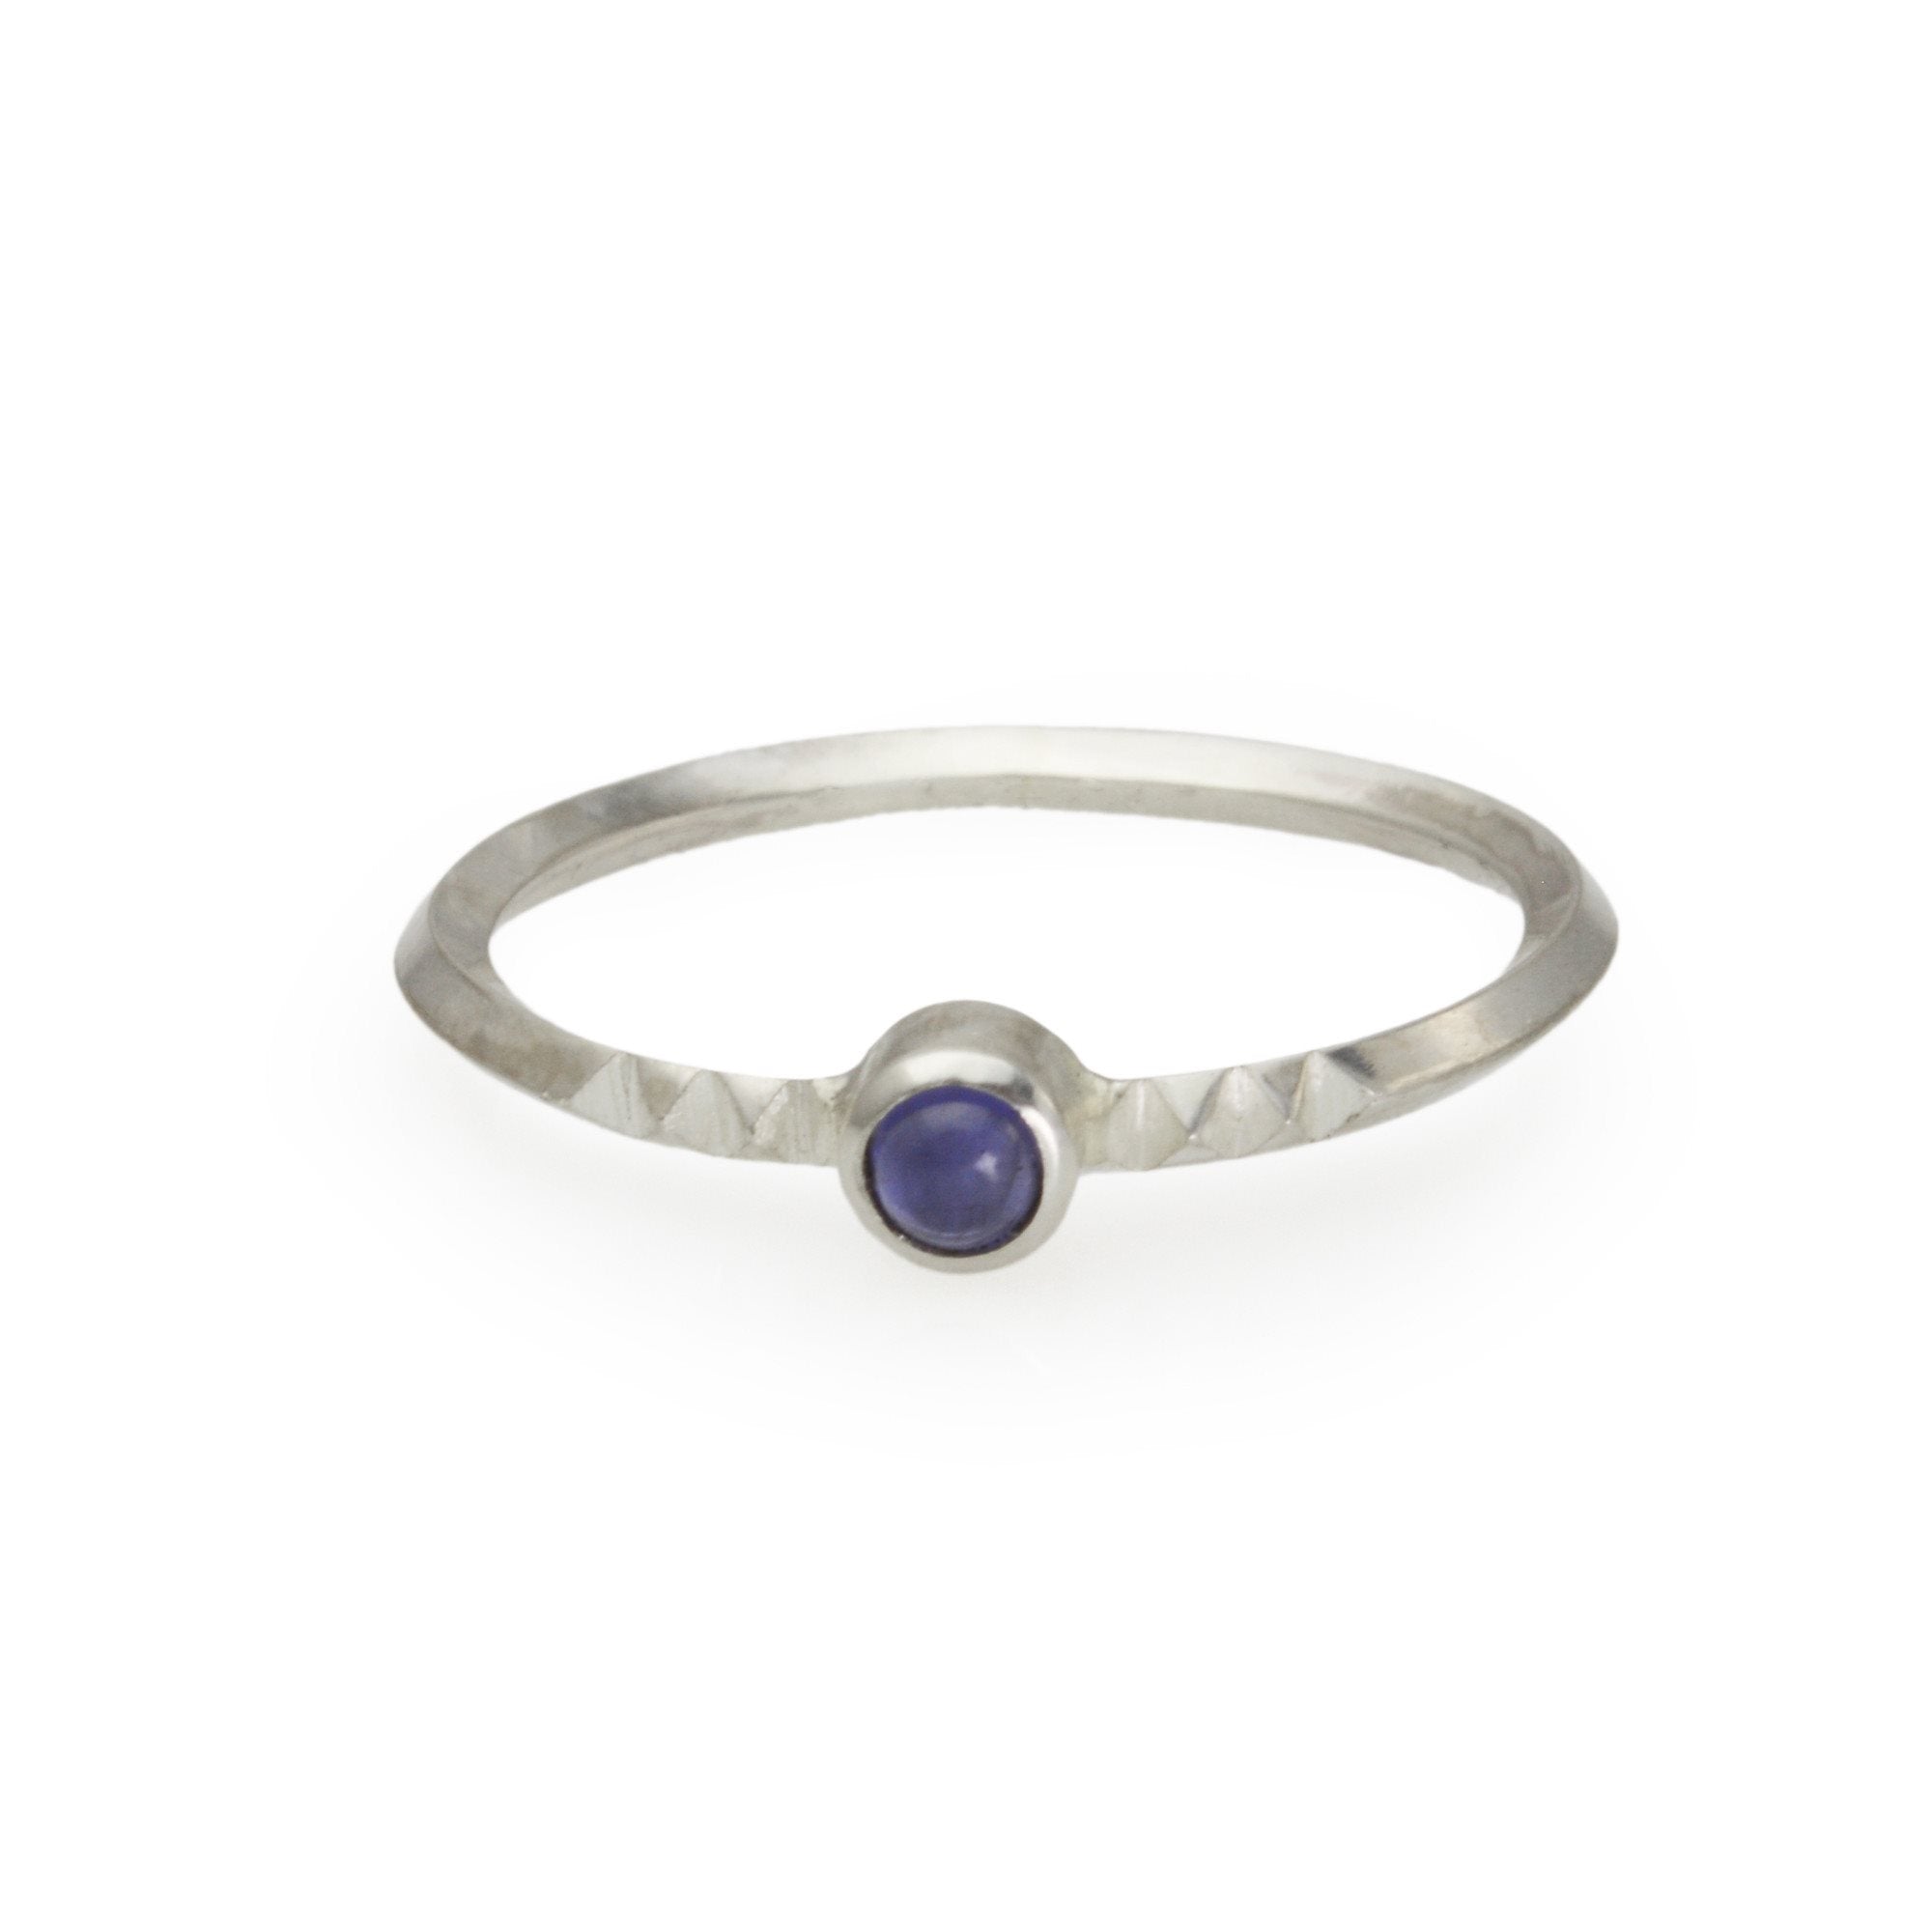 Metropolis Collection Stacking Ring in Sterling Silver and Amethyst